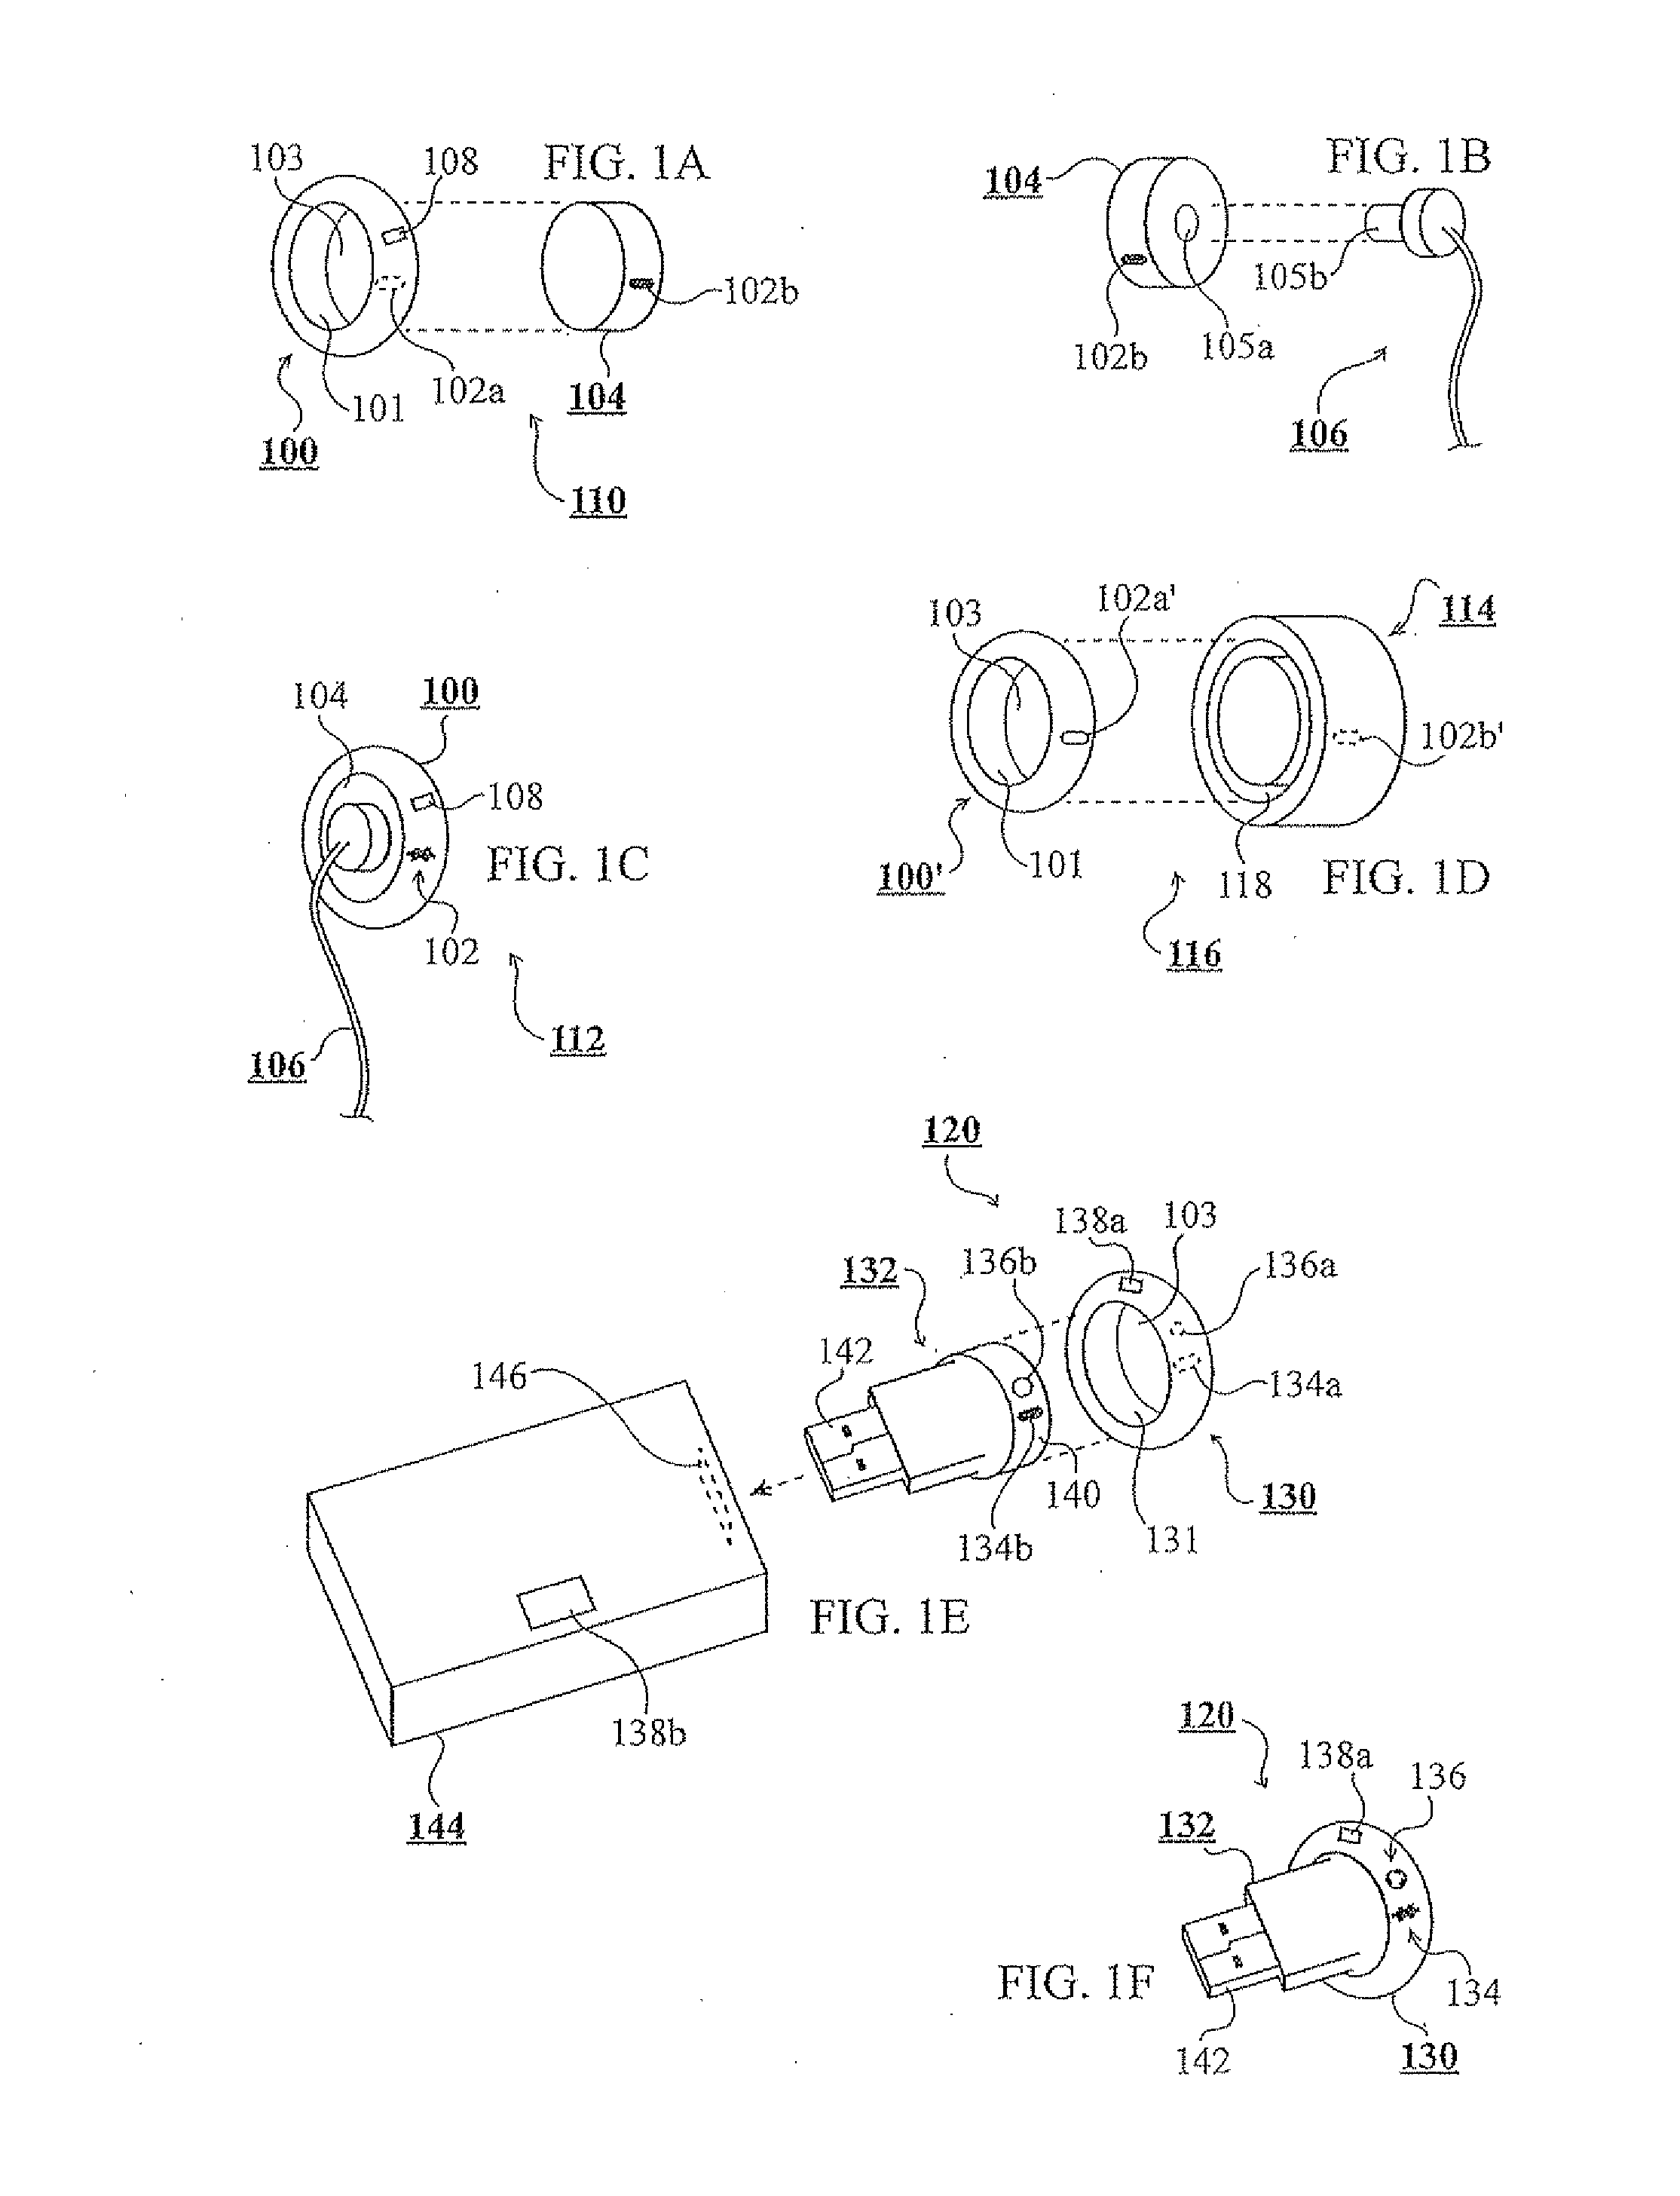 Finger-worn device and interaction methods and communication methods